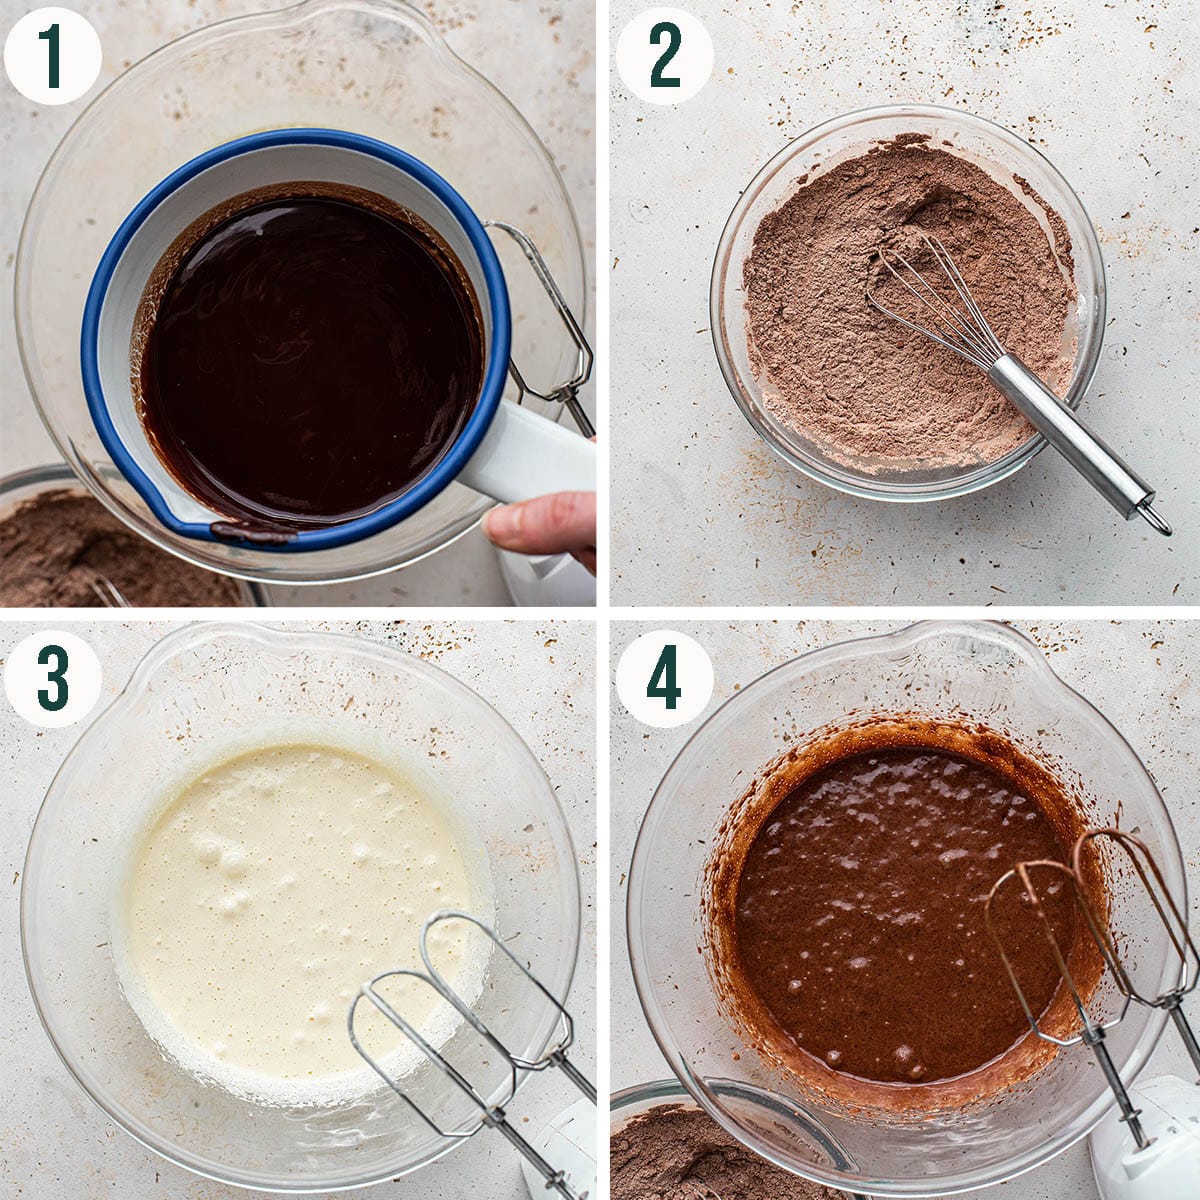 Chocolate cookies steps 1 to 4, mixing the dough.